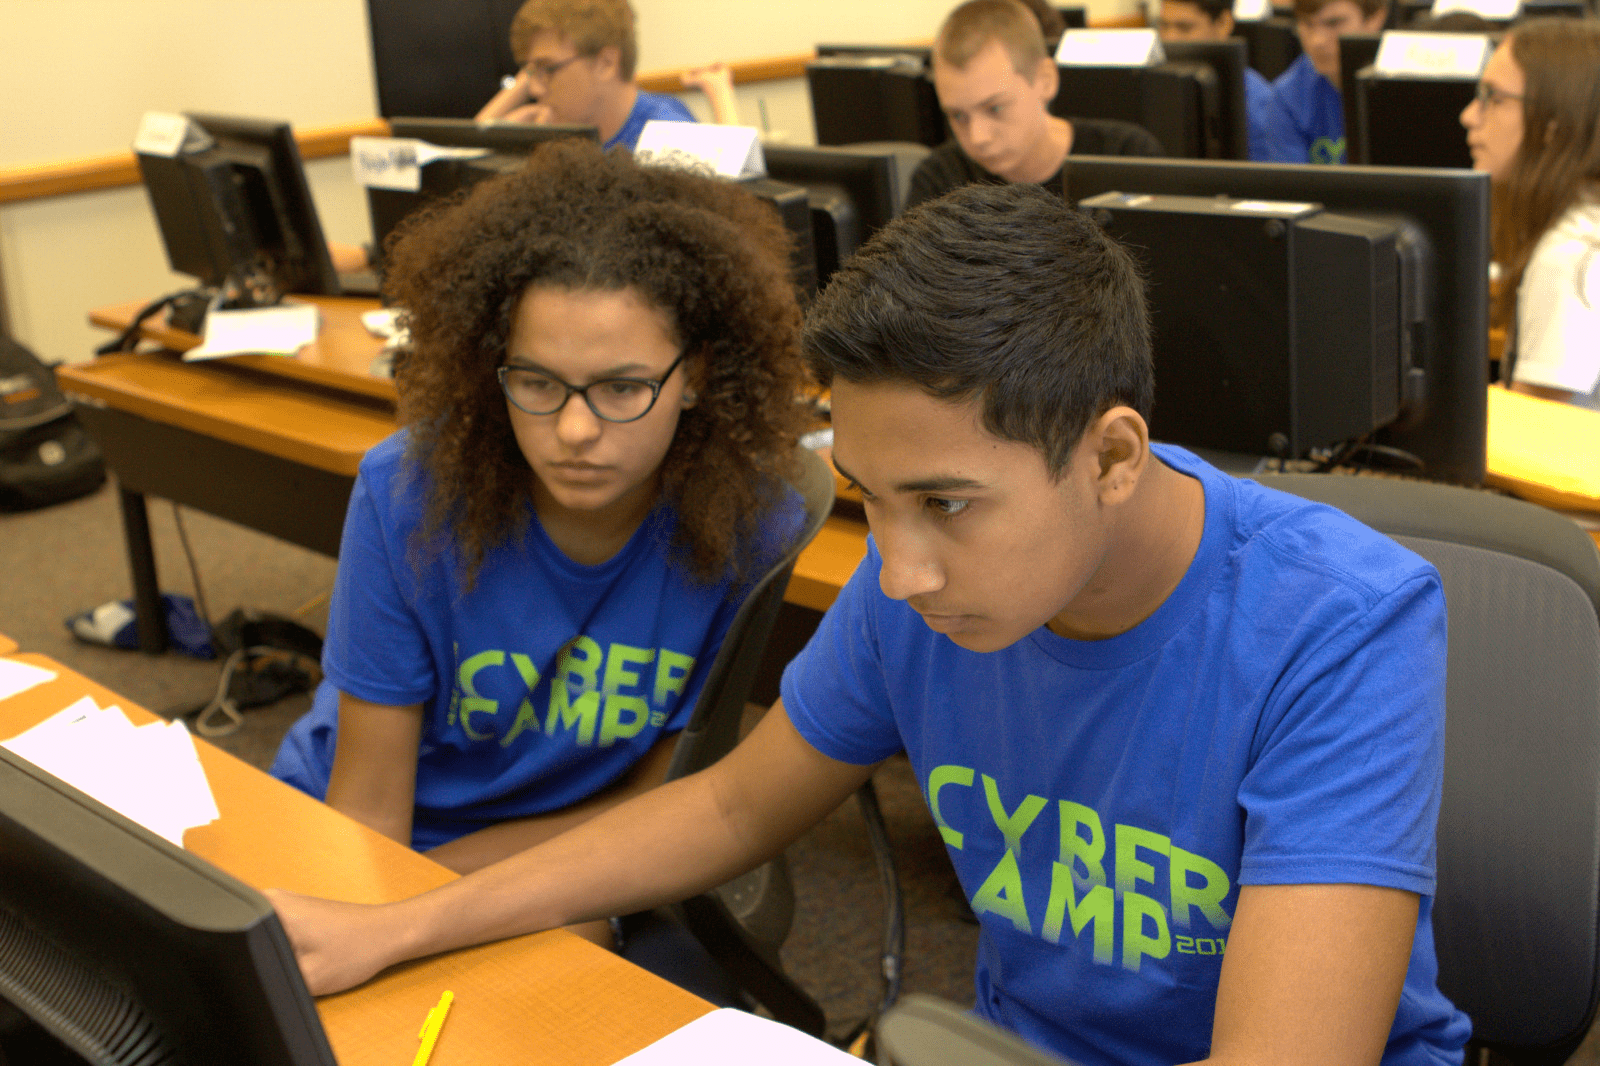 A photo from cybercamp.